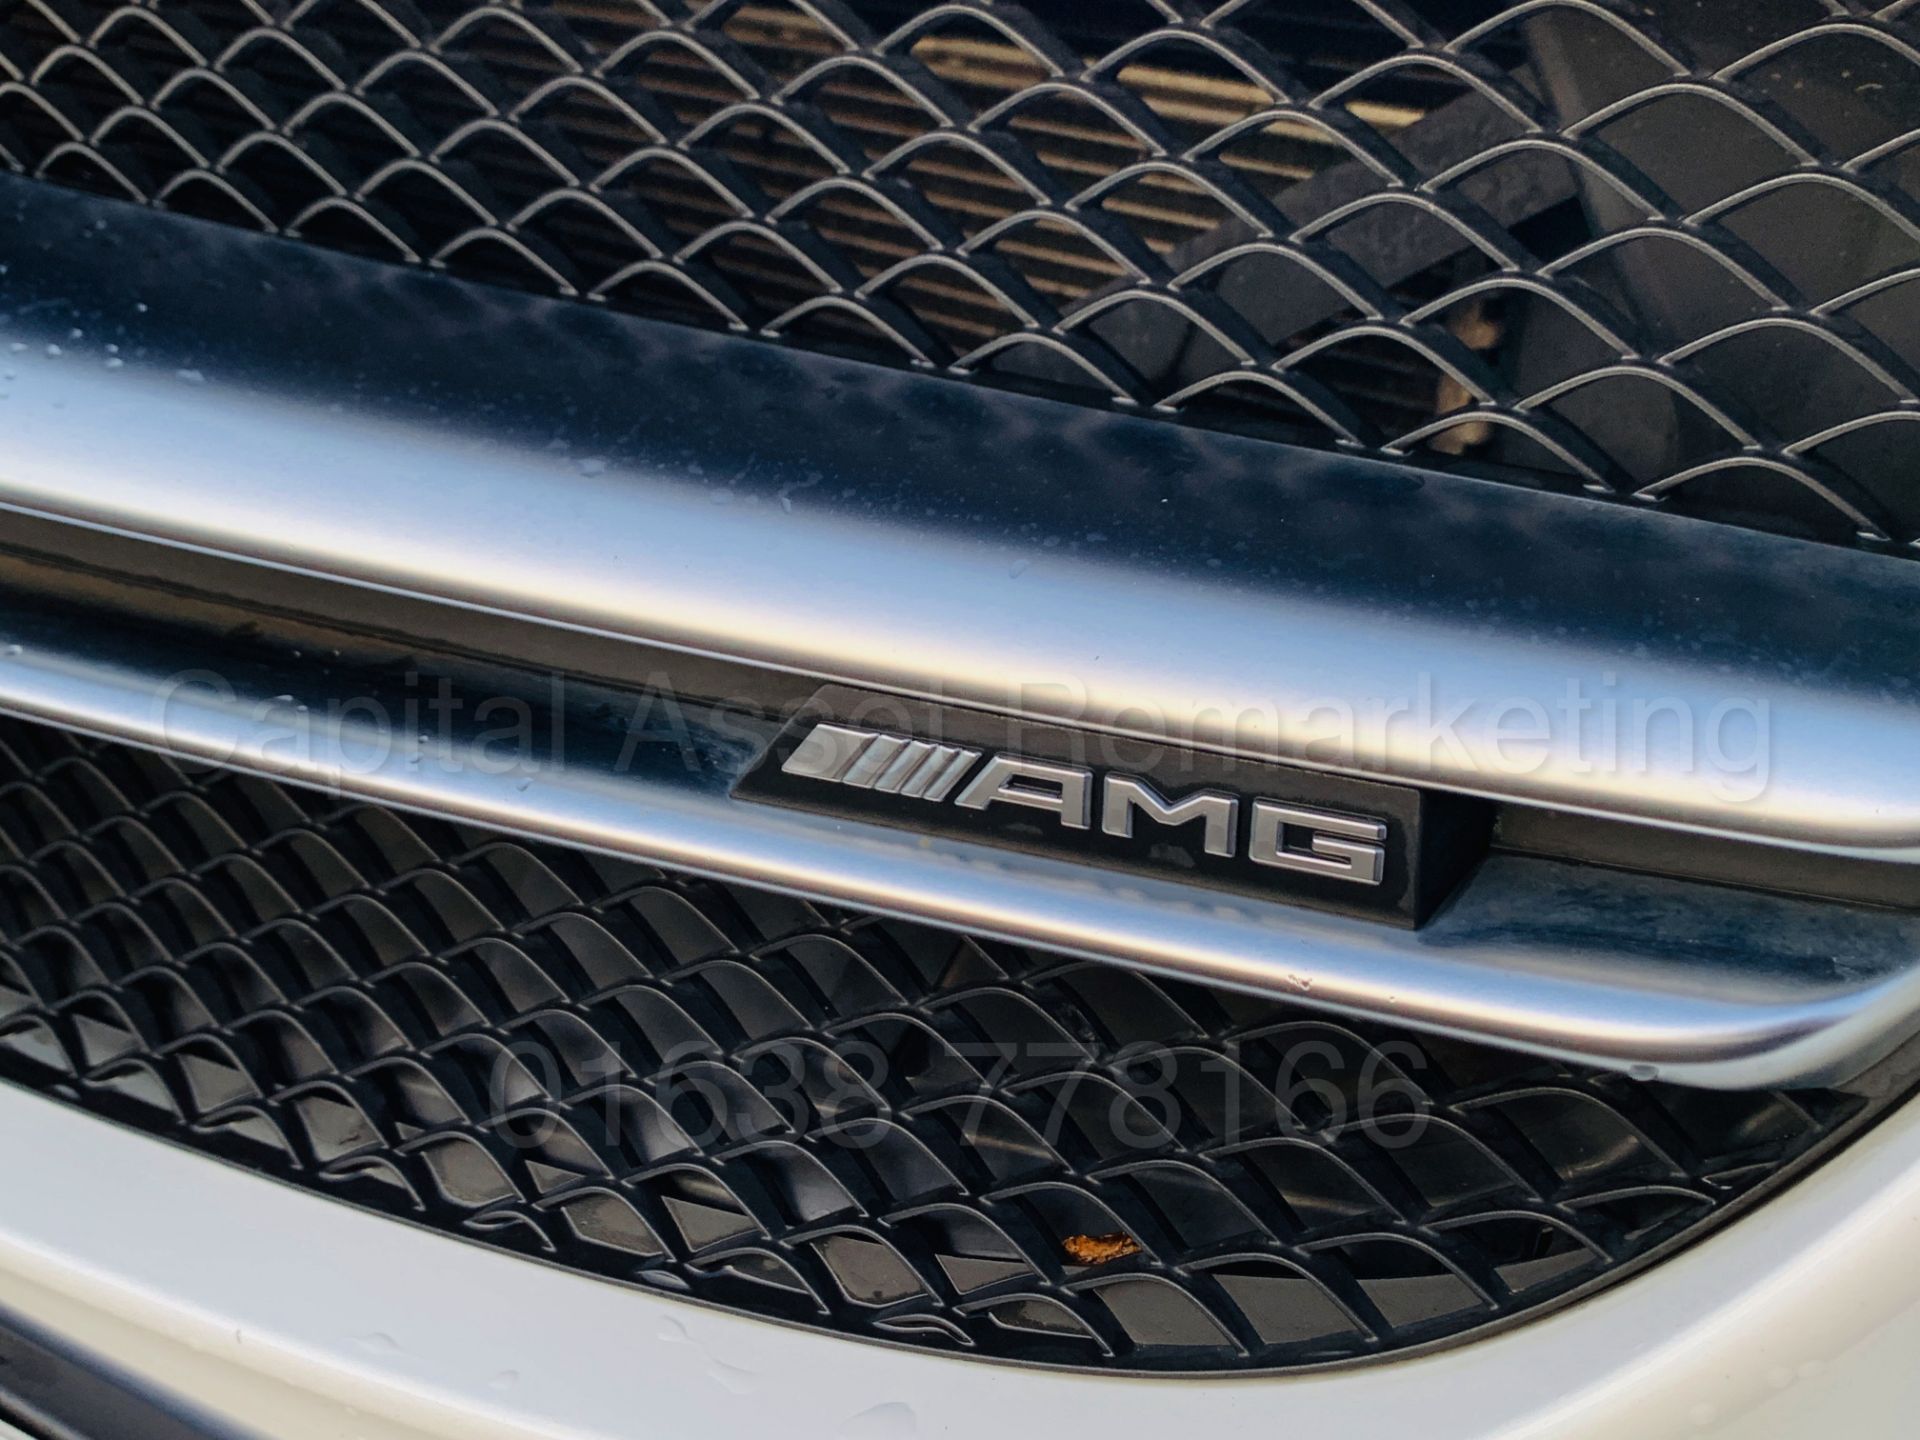 (On Sale) MERCEDES-BENZ AMG C63-S *CABRIOLET* (67 REG) '4.0 BI-TURBO -510 BHP - AUTO' *FULLY LOADED* - Image 27 of 79